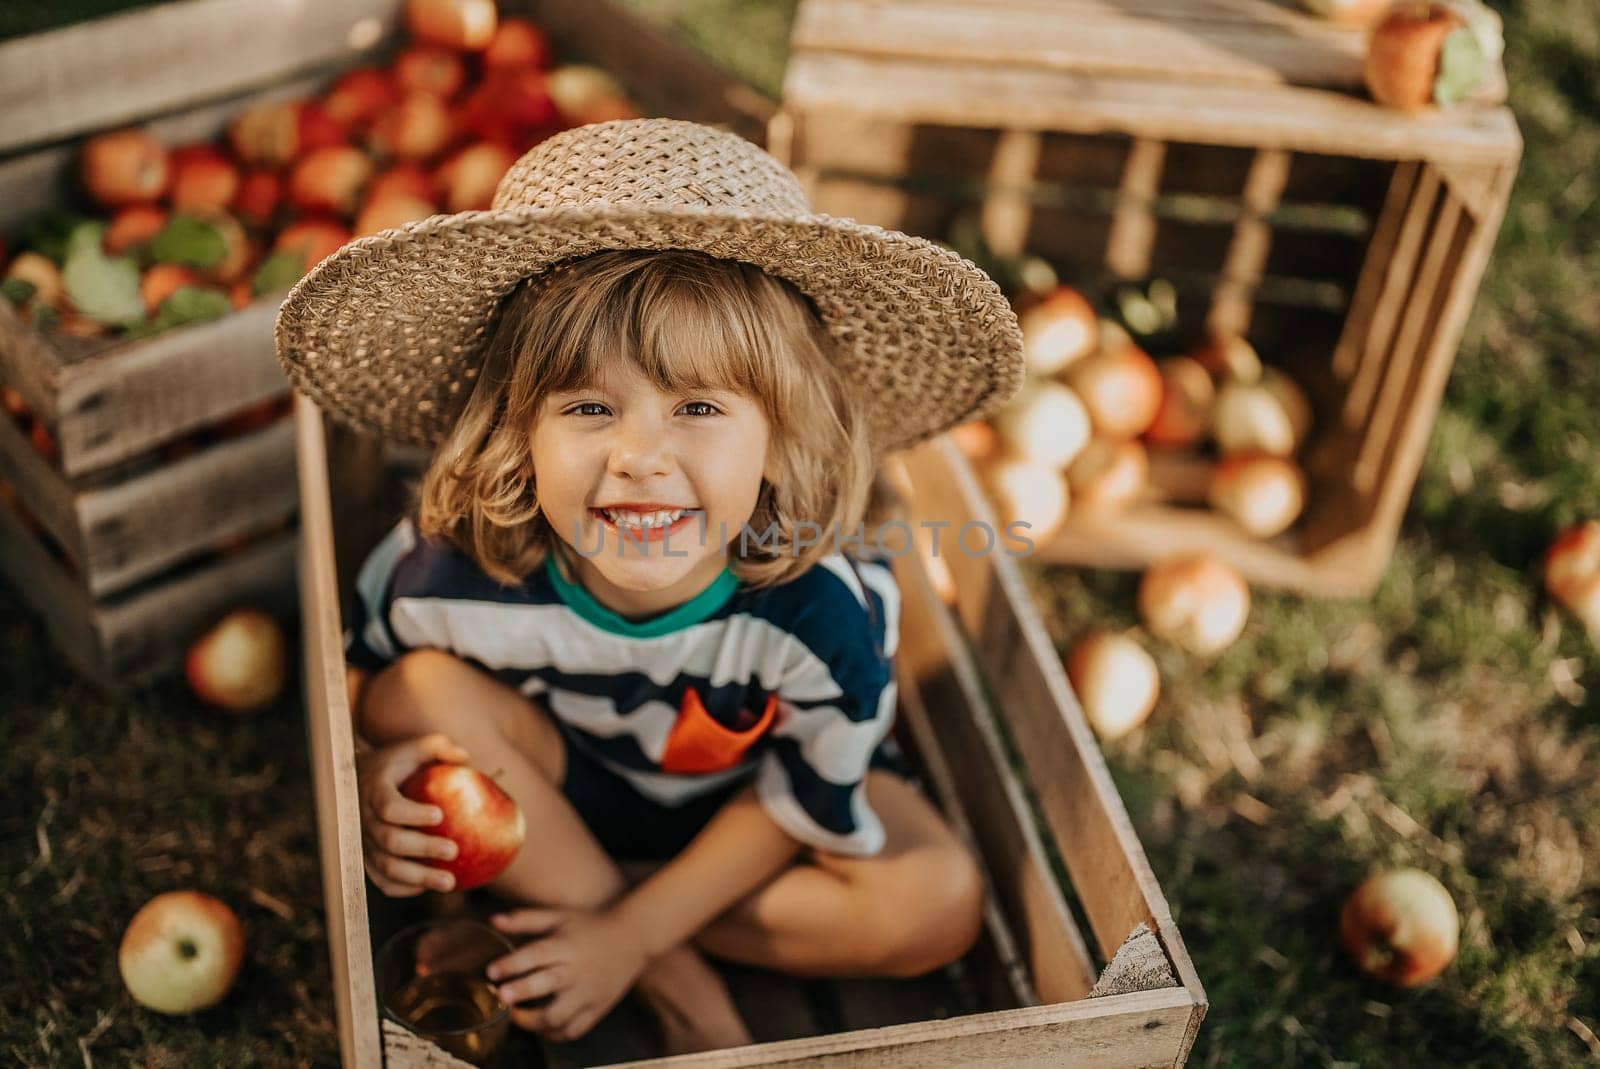 Cute little toddler boy holds ripe red apple in wooden box in orchard. Son in home garden explores plants, nature in autumn countryside. Amazing scene. Family, love, harvest, childhood concept